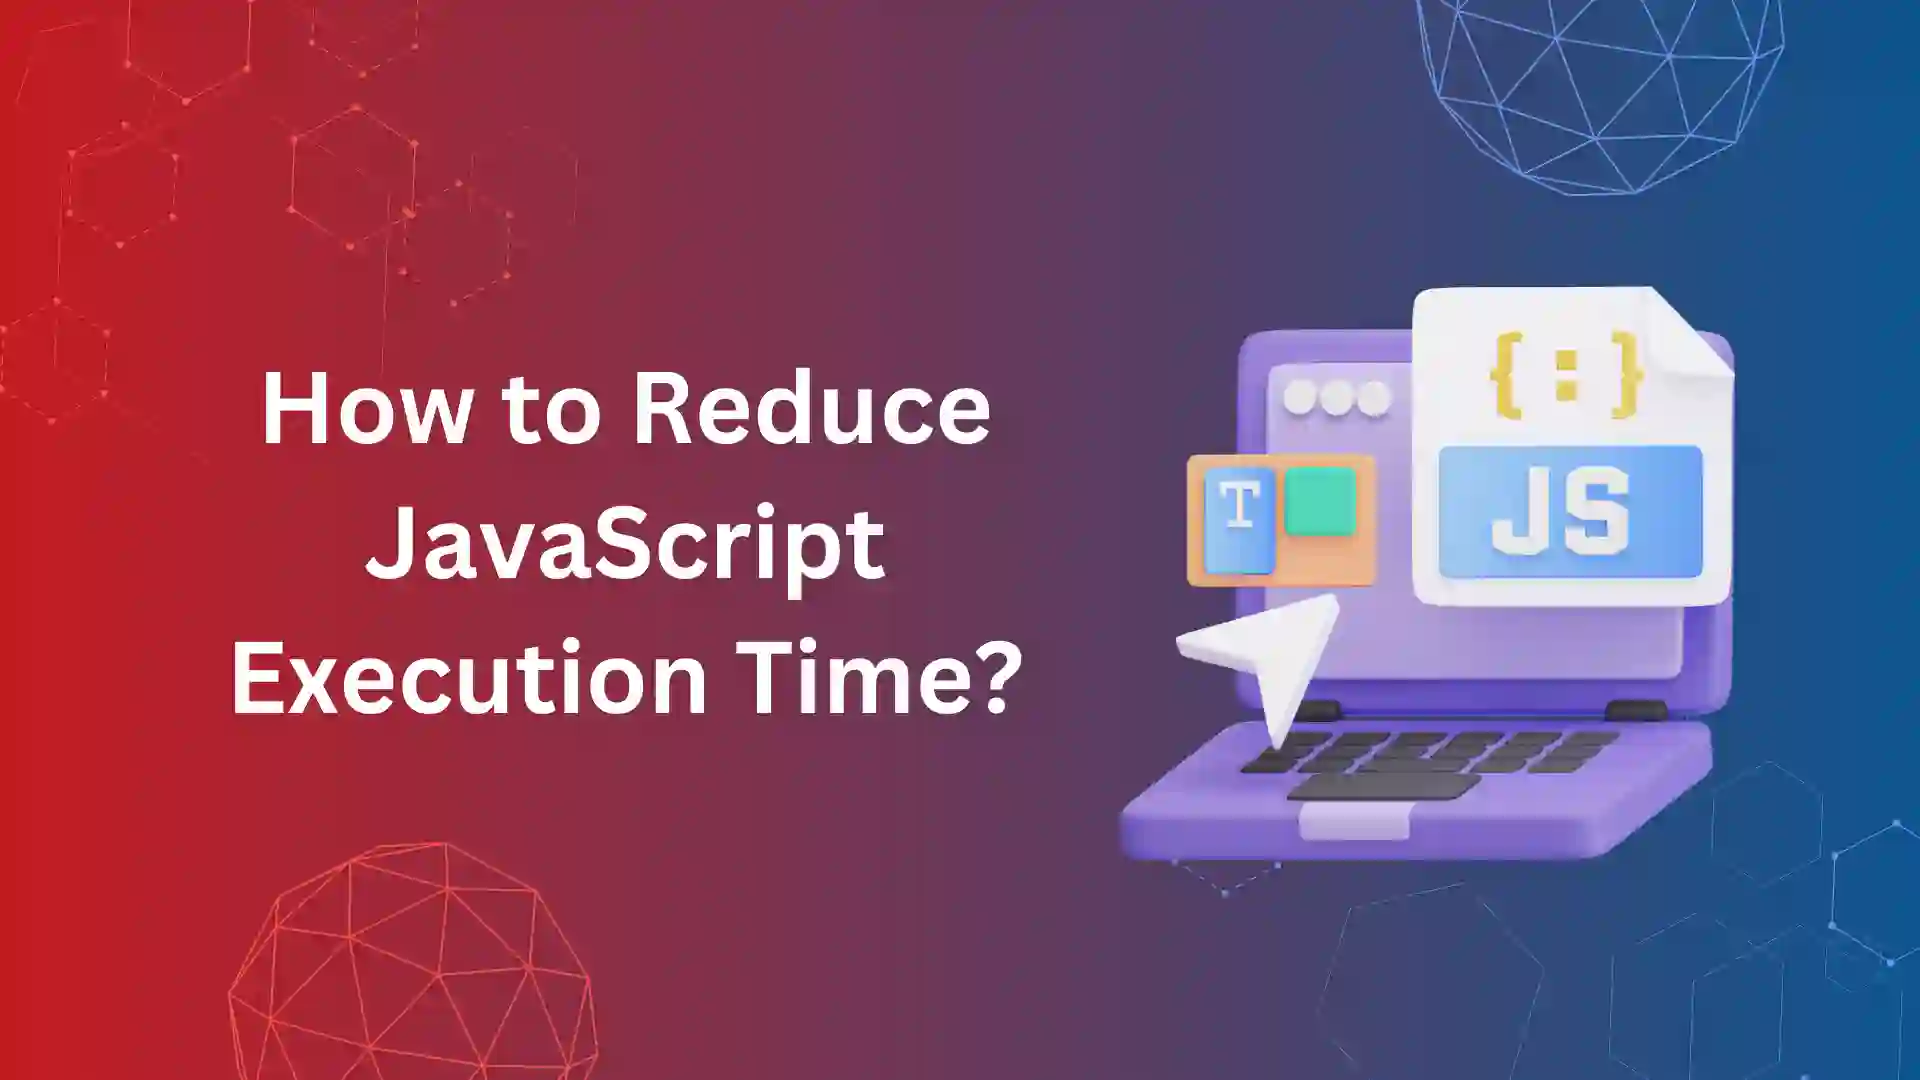 How to Reduce JavaScript Execution Time